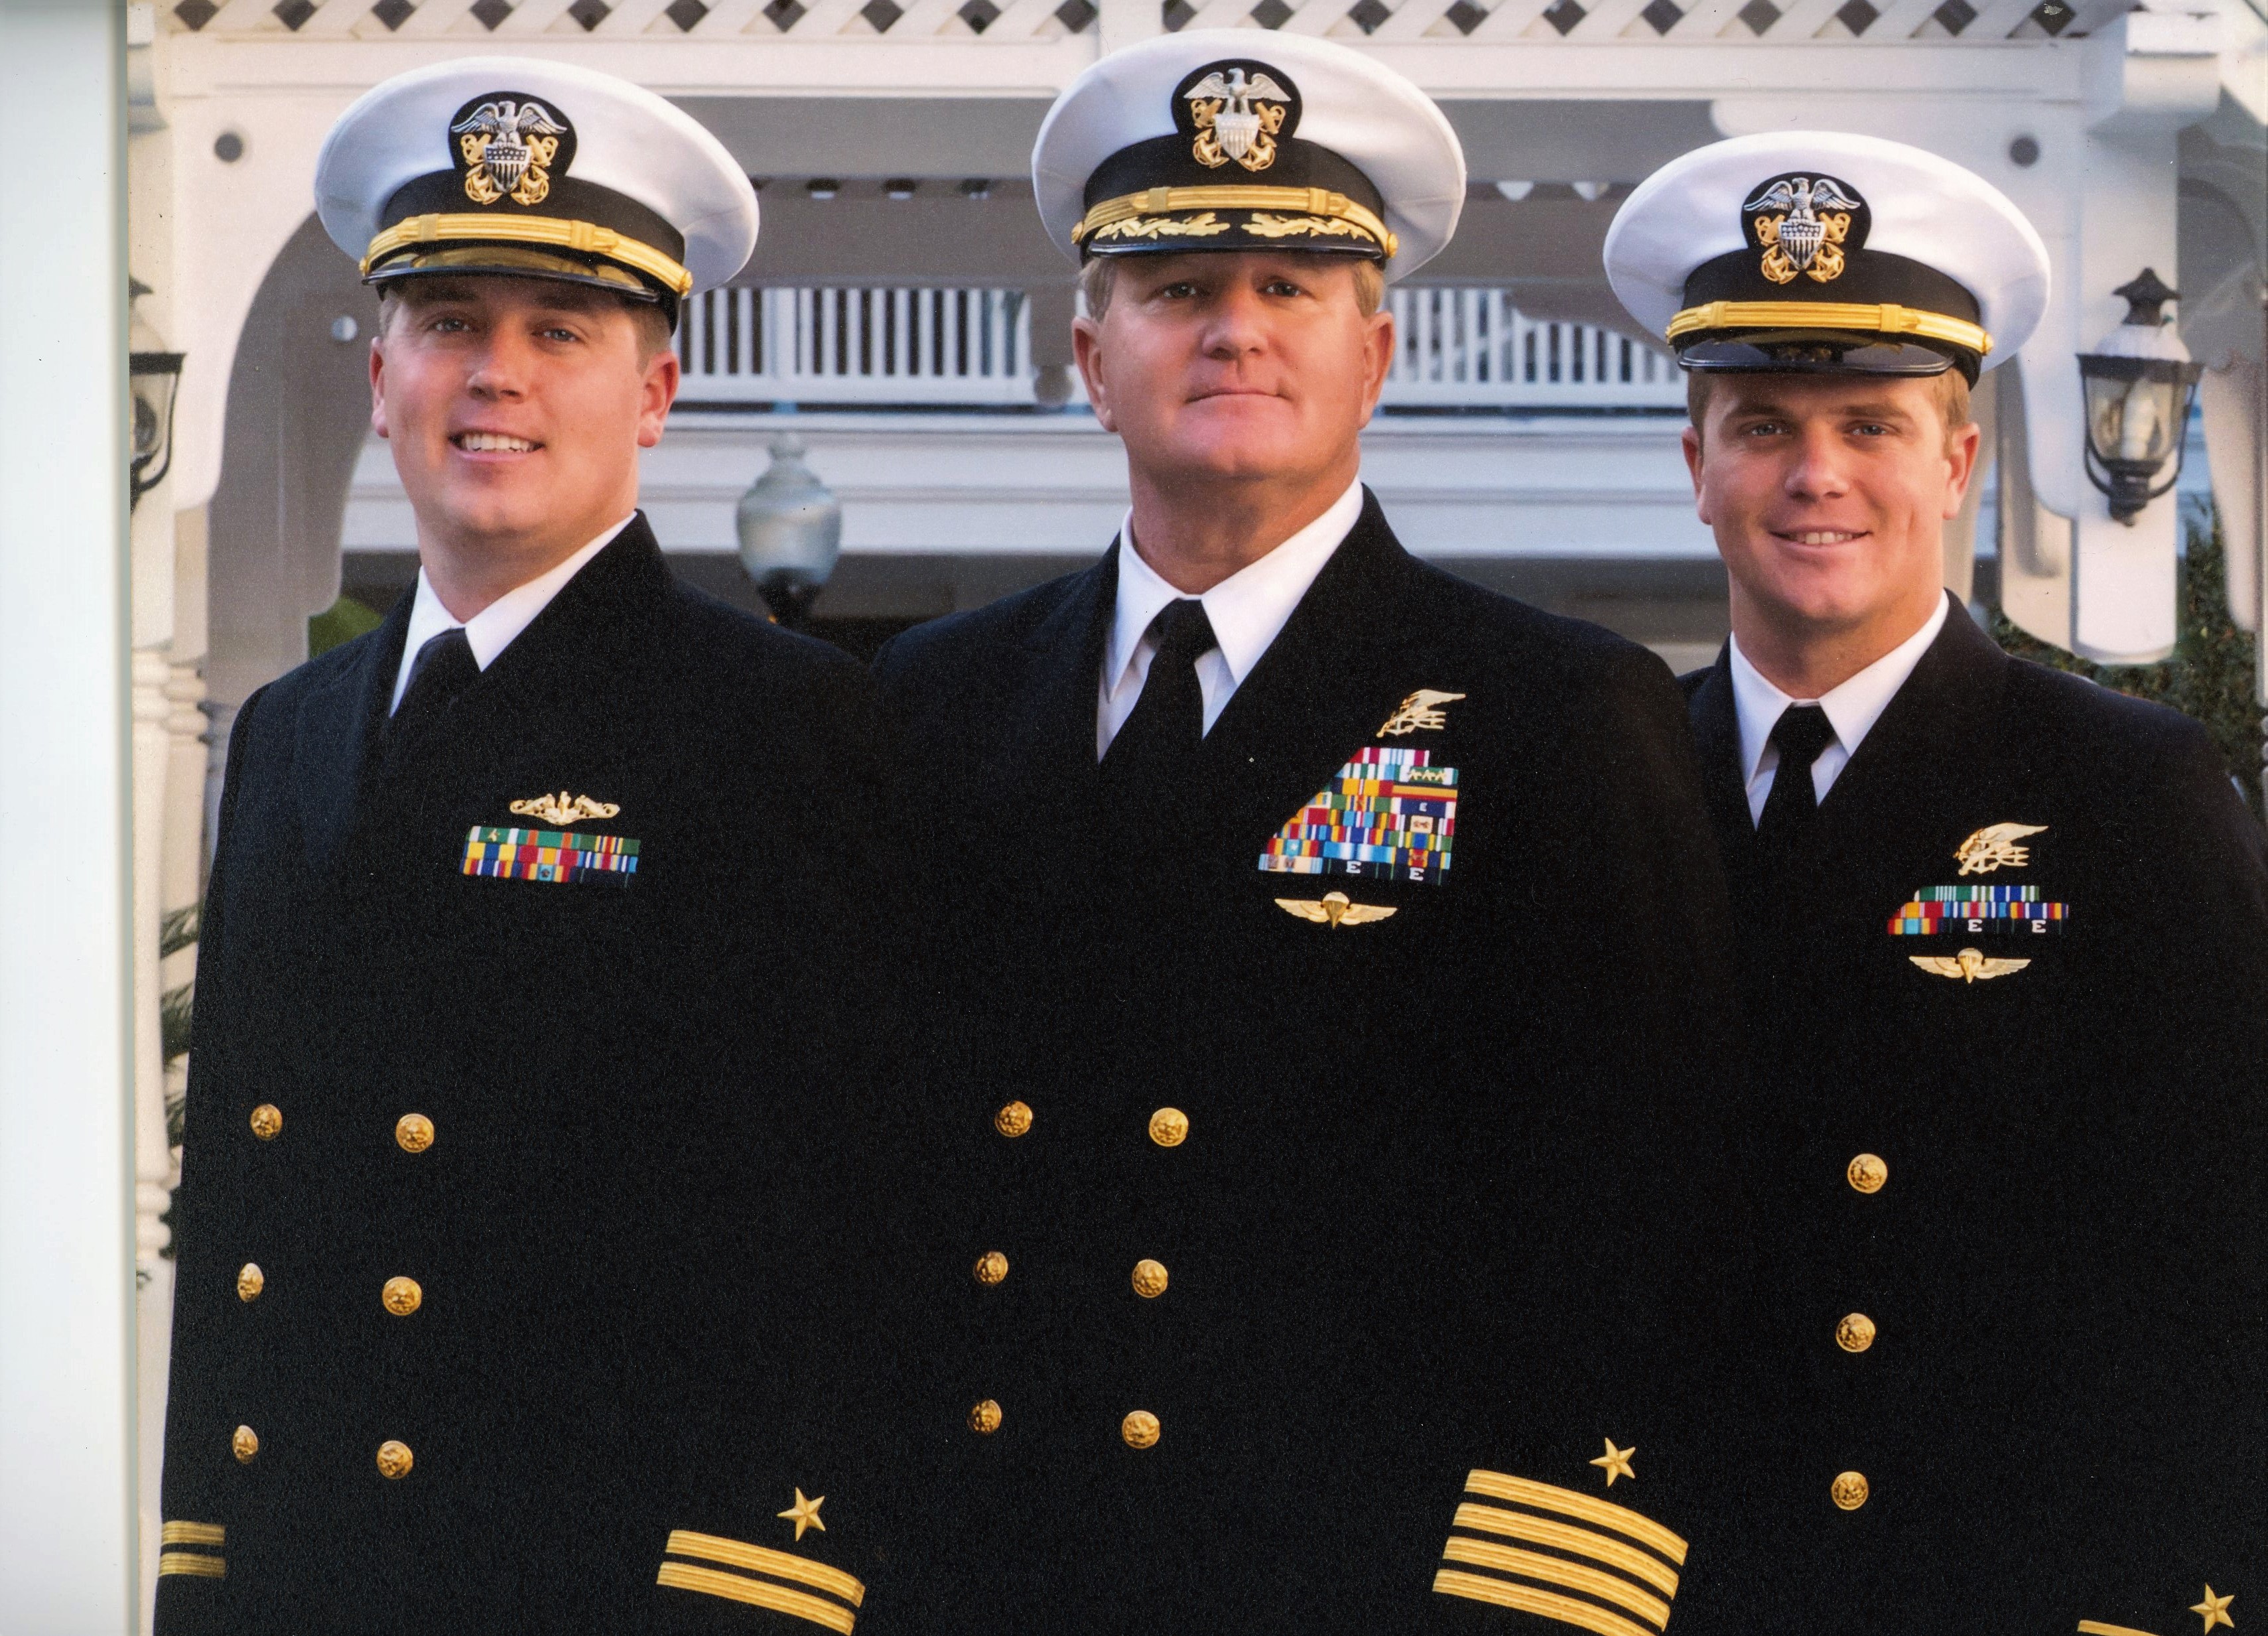 Retired Navy Captain Richard Sisk stands with his sons Brian and Sean, who are also in Navy uniforms.